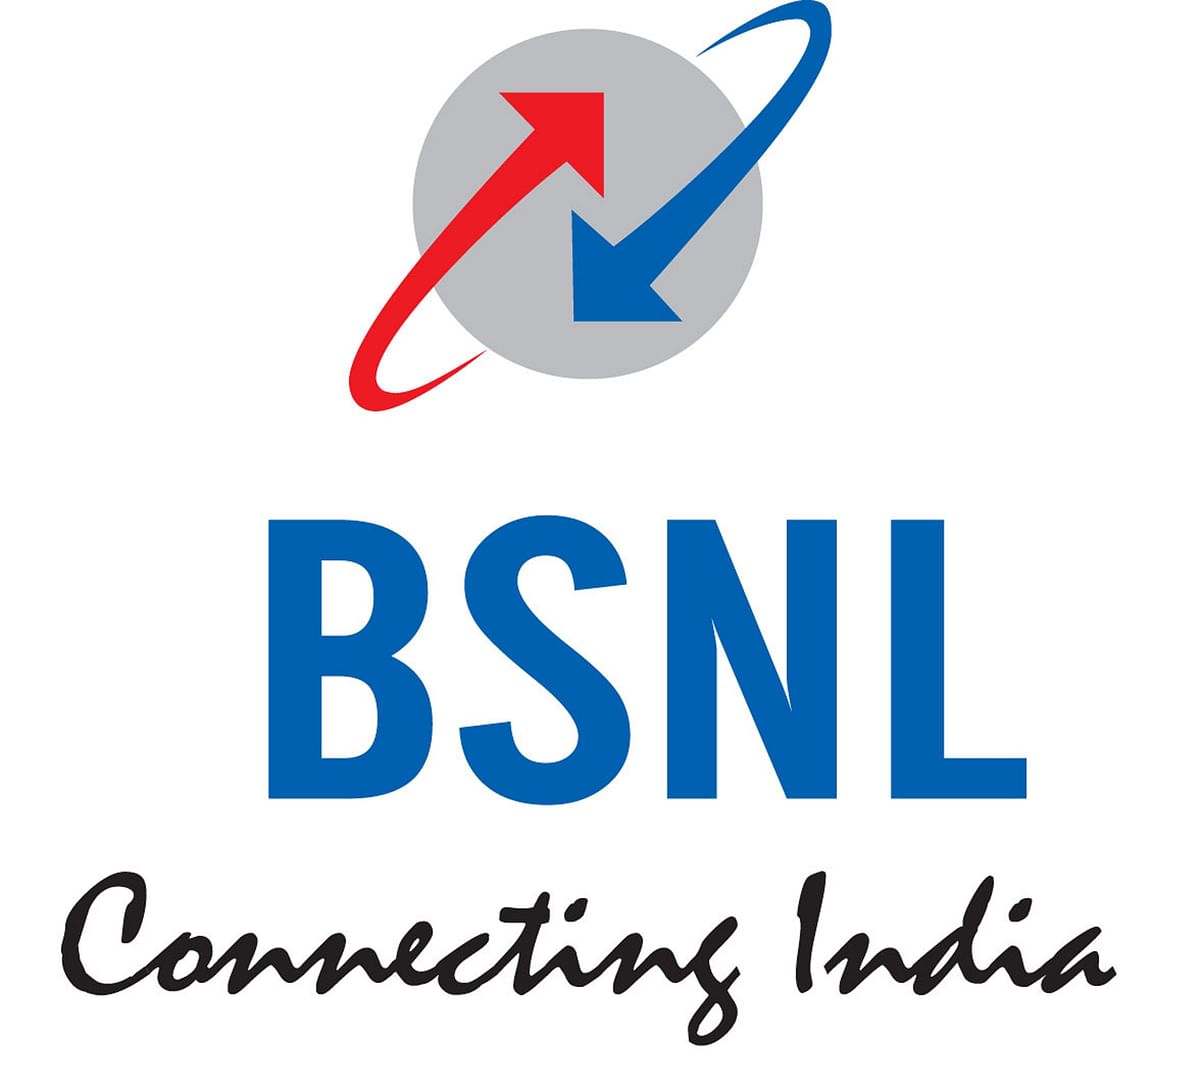 BSNL, Air India, MTNL highest loss-making PSUs in FY19; ONGC most profitable: Survey